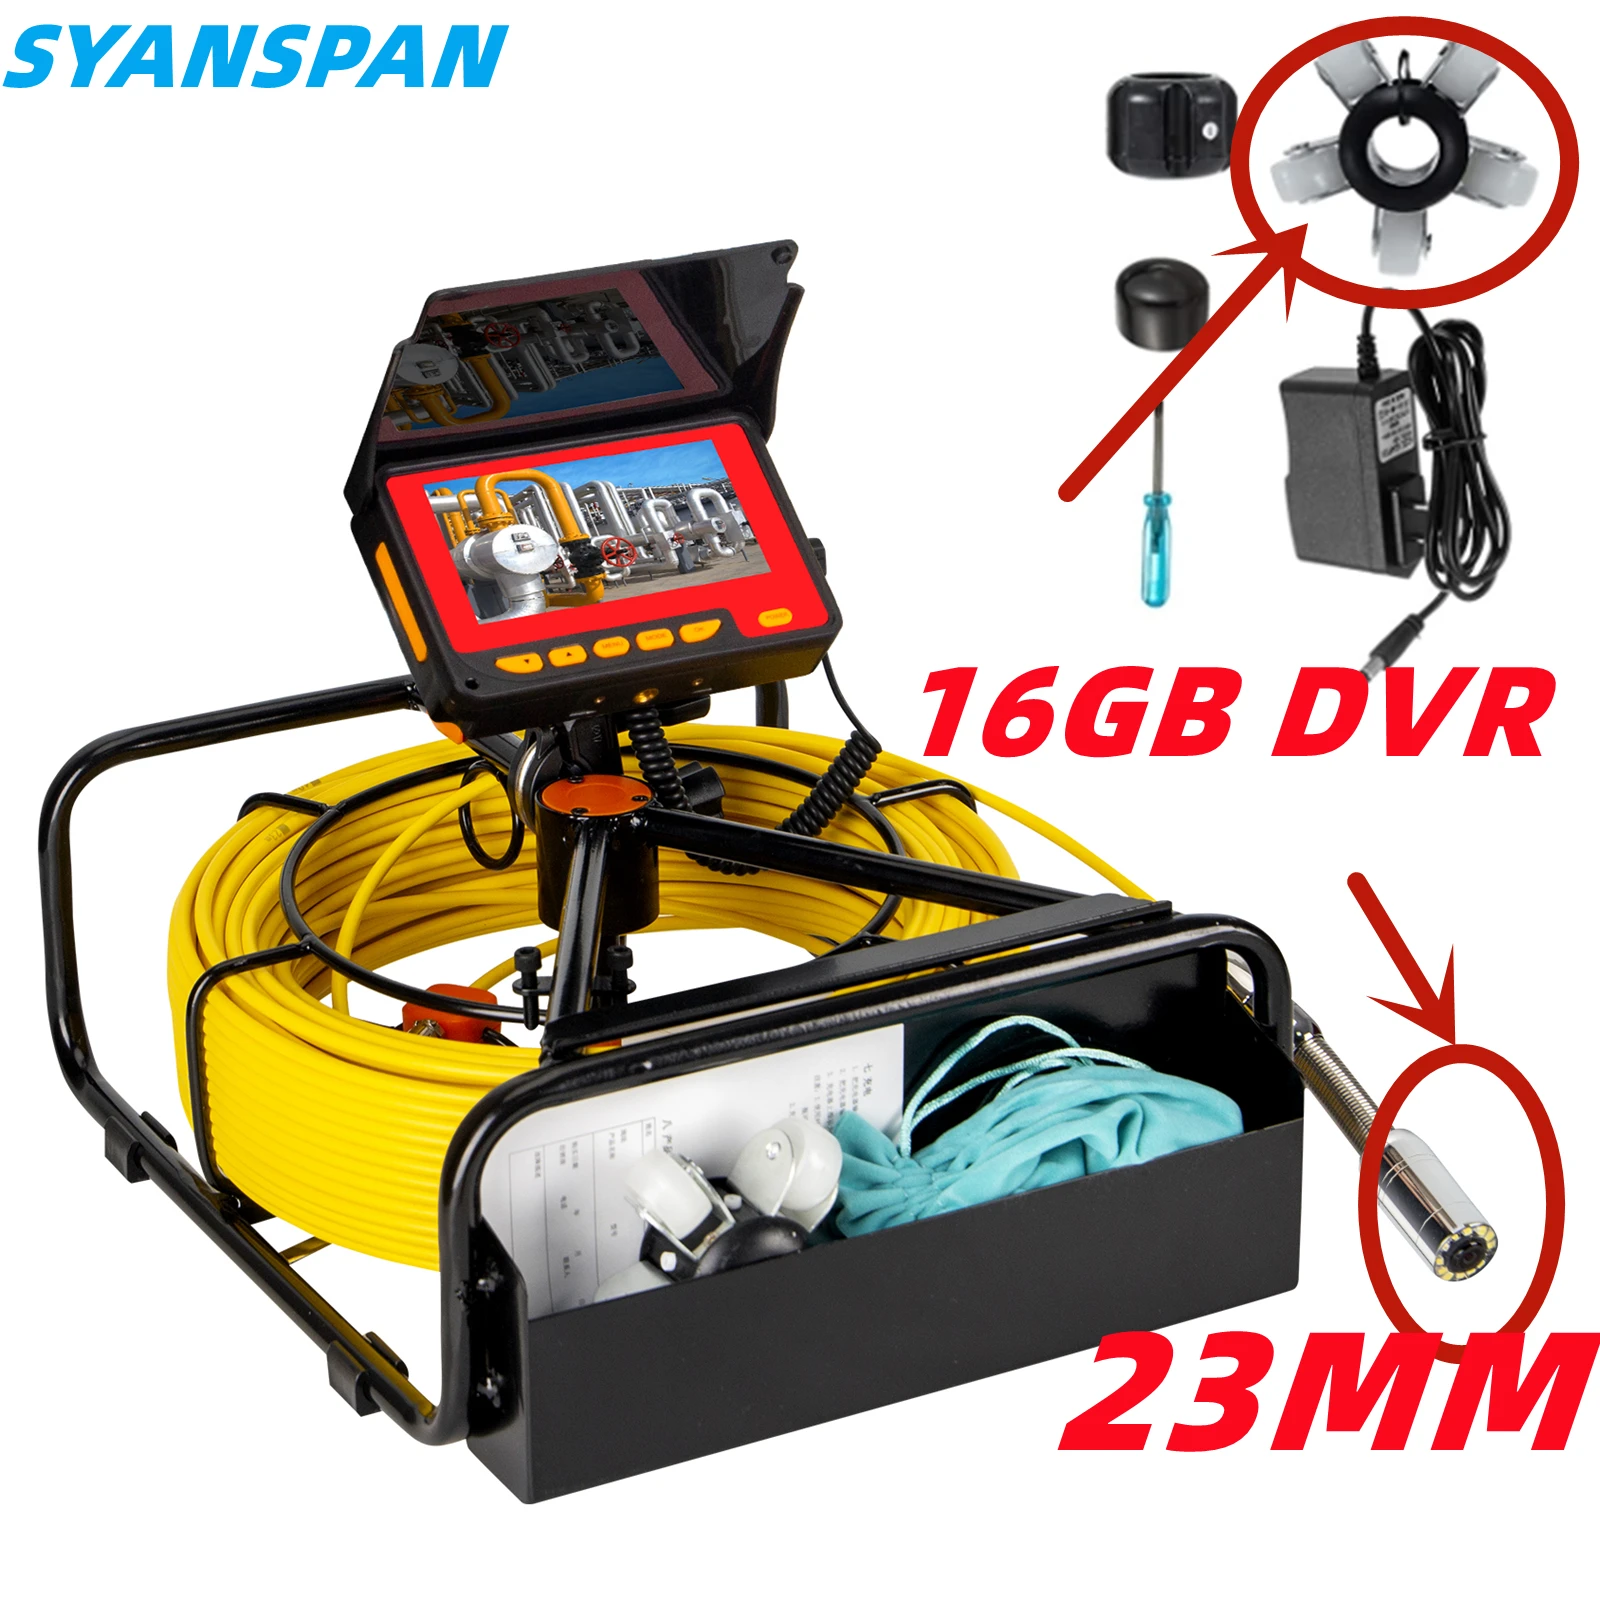 23MM Camera Pipe Inspection Camera with DVR 16GB FT Card,SYANSPAN Sewer Drain Industrial Endoscope 8500MHA Battery 10/20/30/50M 4 3inch pipeline drain video inspection camera system for piprline drain cleaner 8500ma battery with 6 led night vision